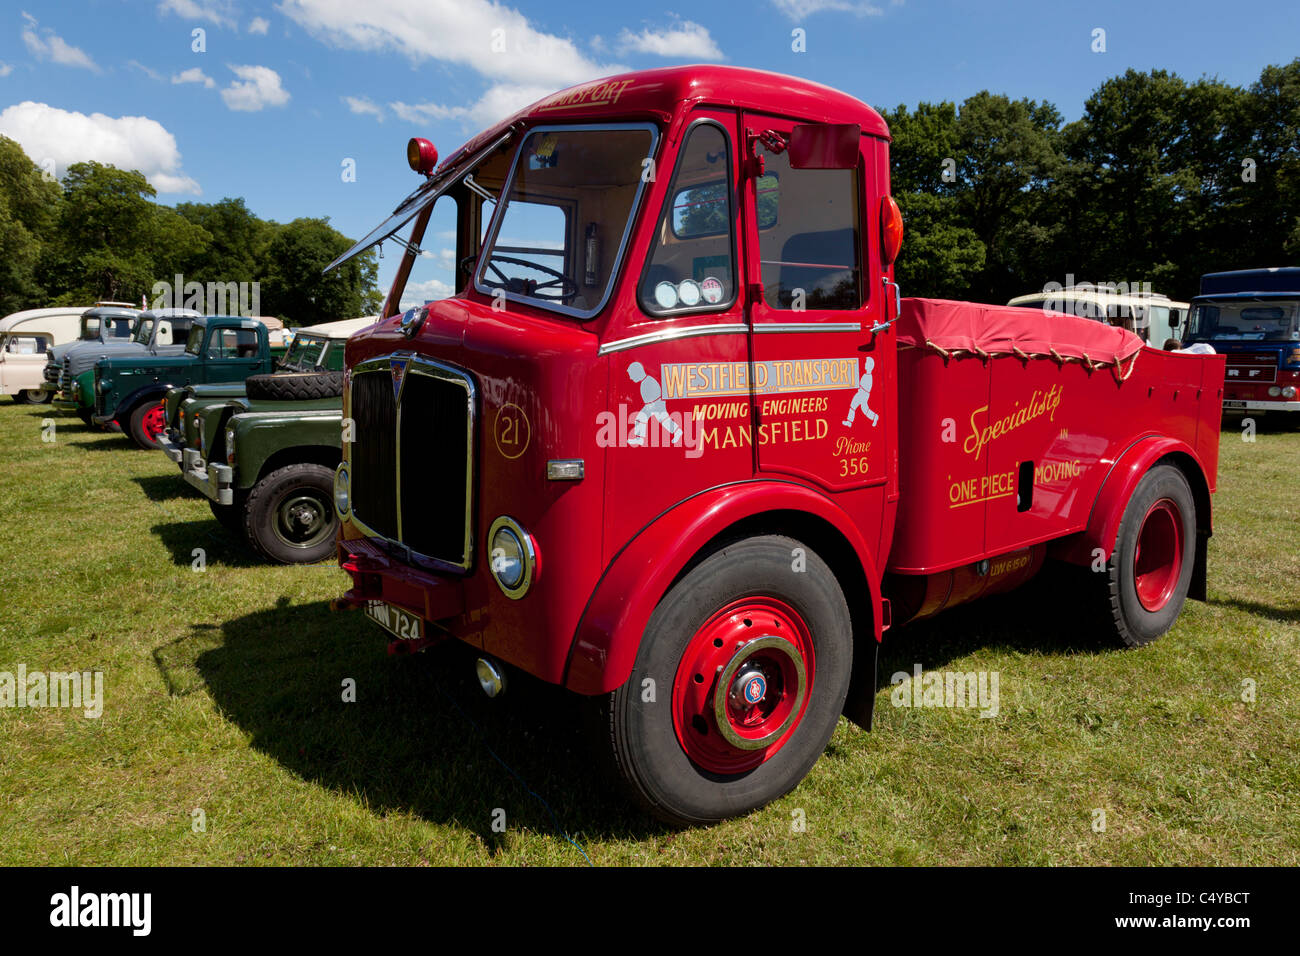 haulage vehicles and vintage lorries at show 2011 Stock Photo